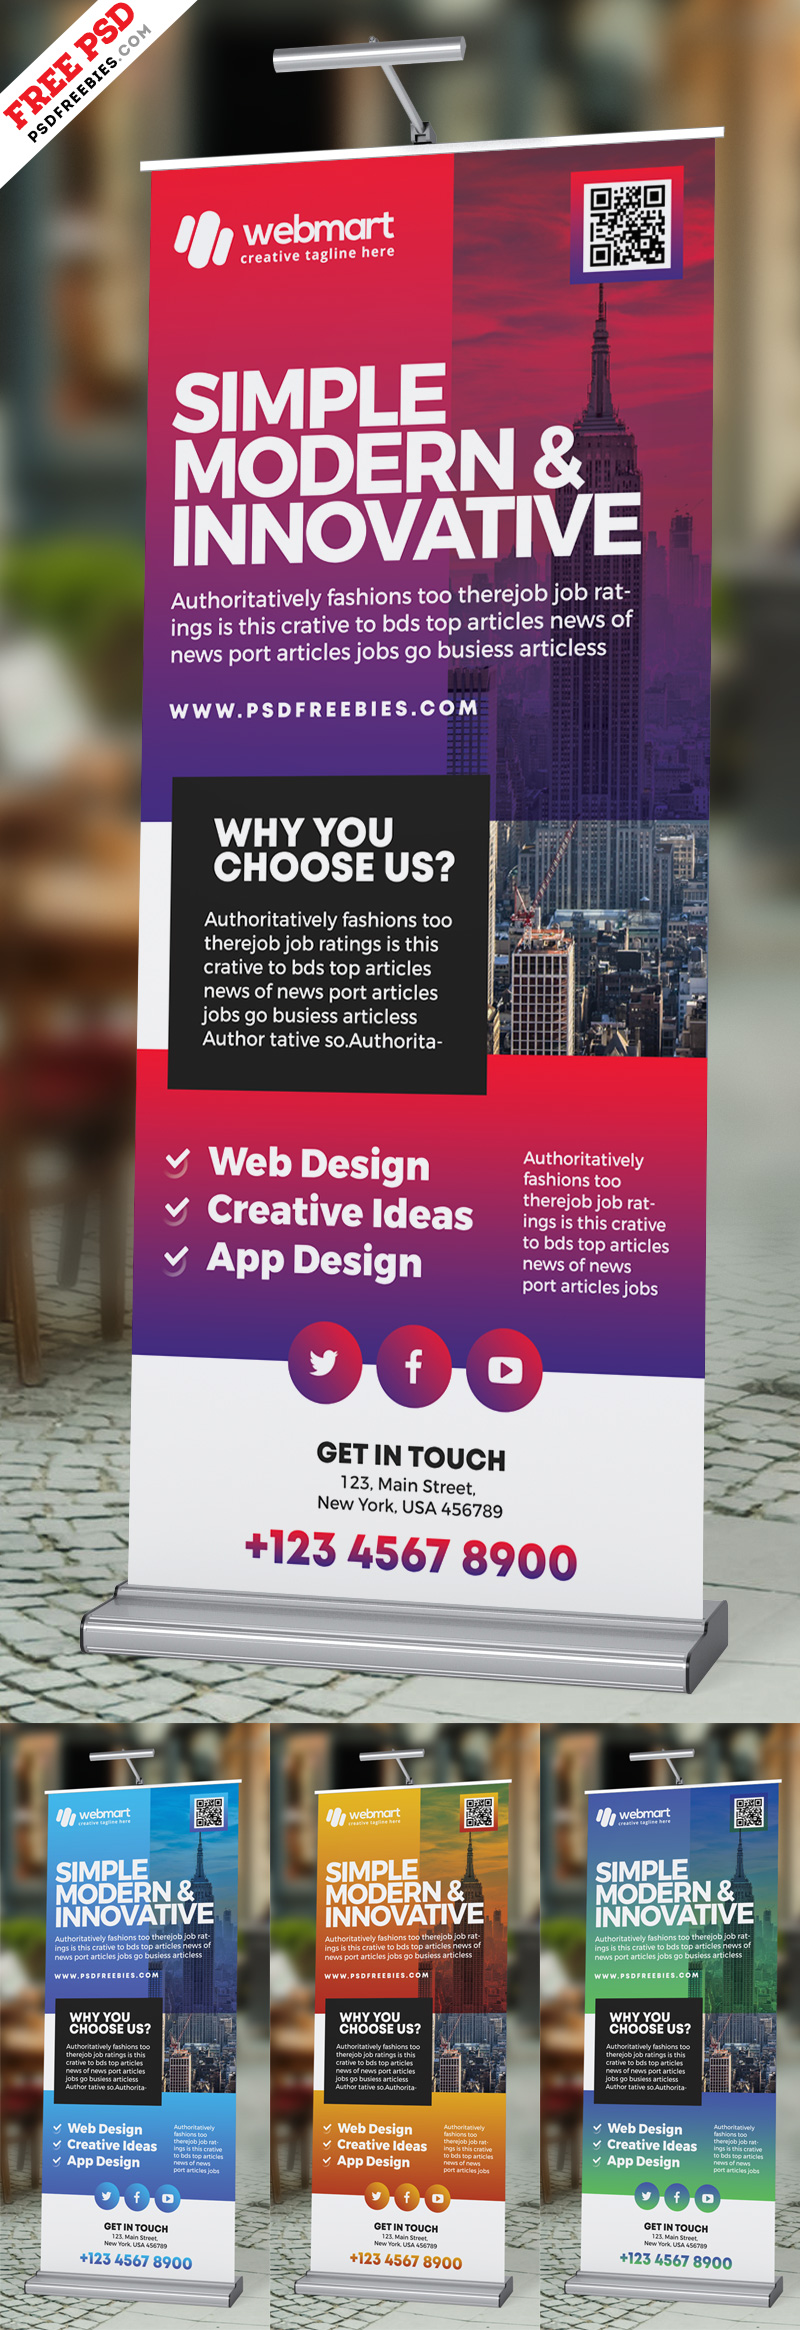 Business Roll-up Banner PSD Free Download